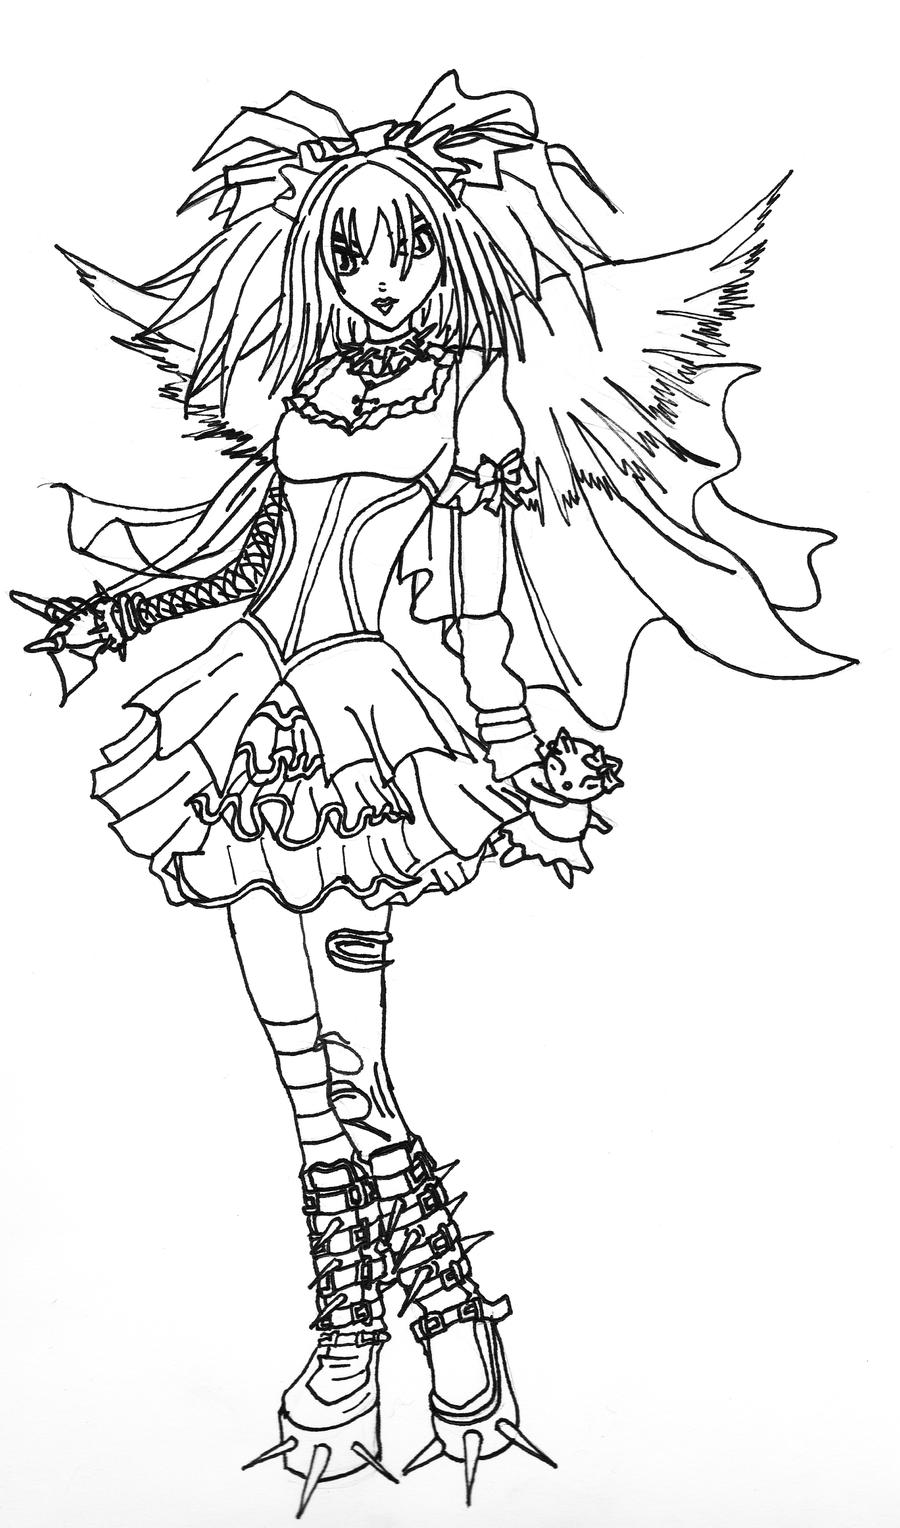 15 Pics of Gothic Girl Coloring Pages - deviantART Gothic Coloring ...